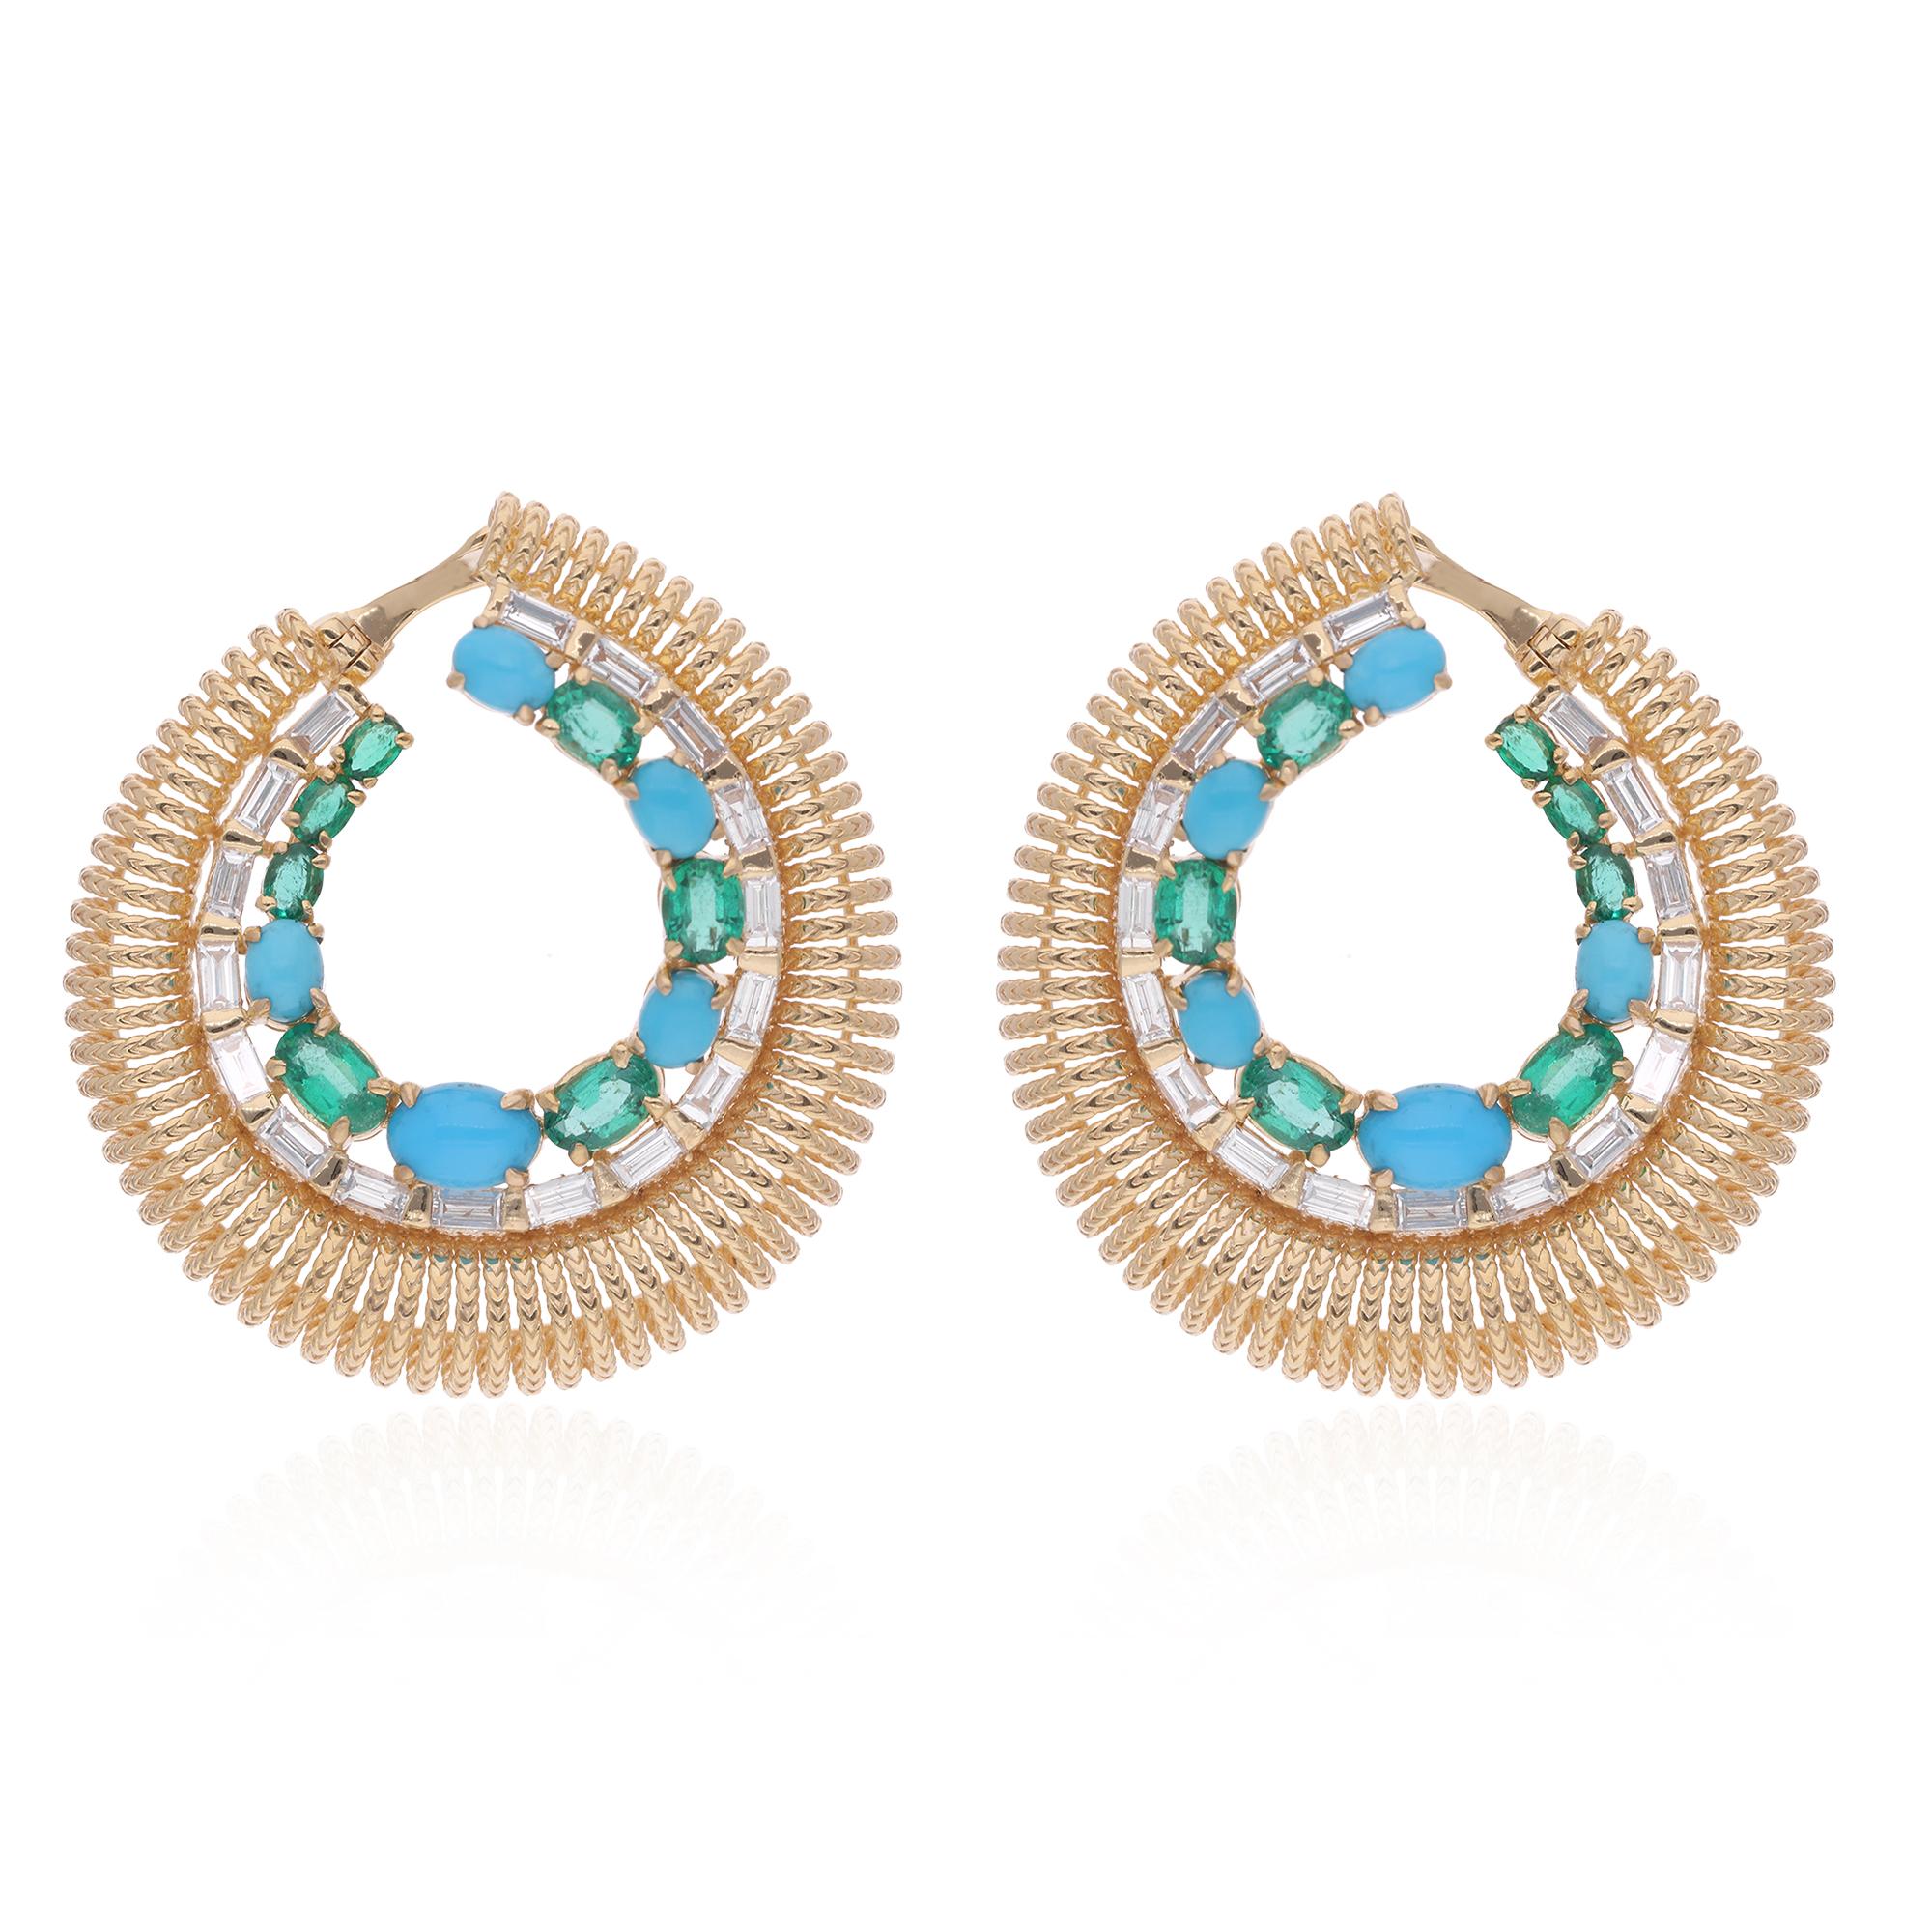 Elevate your style with the mesmerizing beauty of these Emerald Turquoise Gemstone Hoop Earrings, adorned with Baguette Diamonds and crafted in luxurious 14 Karat Yellow Gold. These exquisite earrings exude a sense of effortless sophistication and